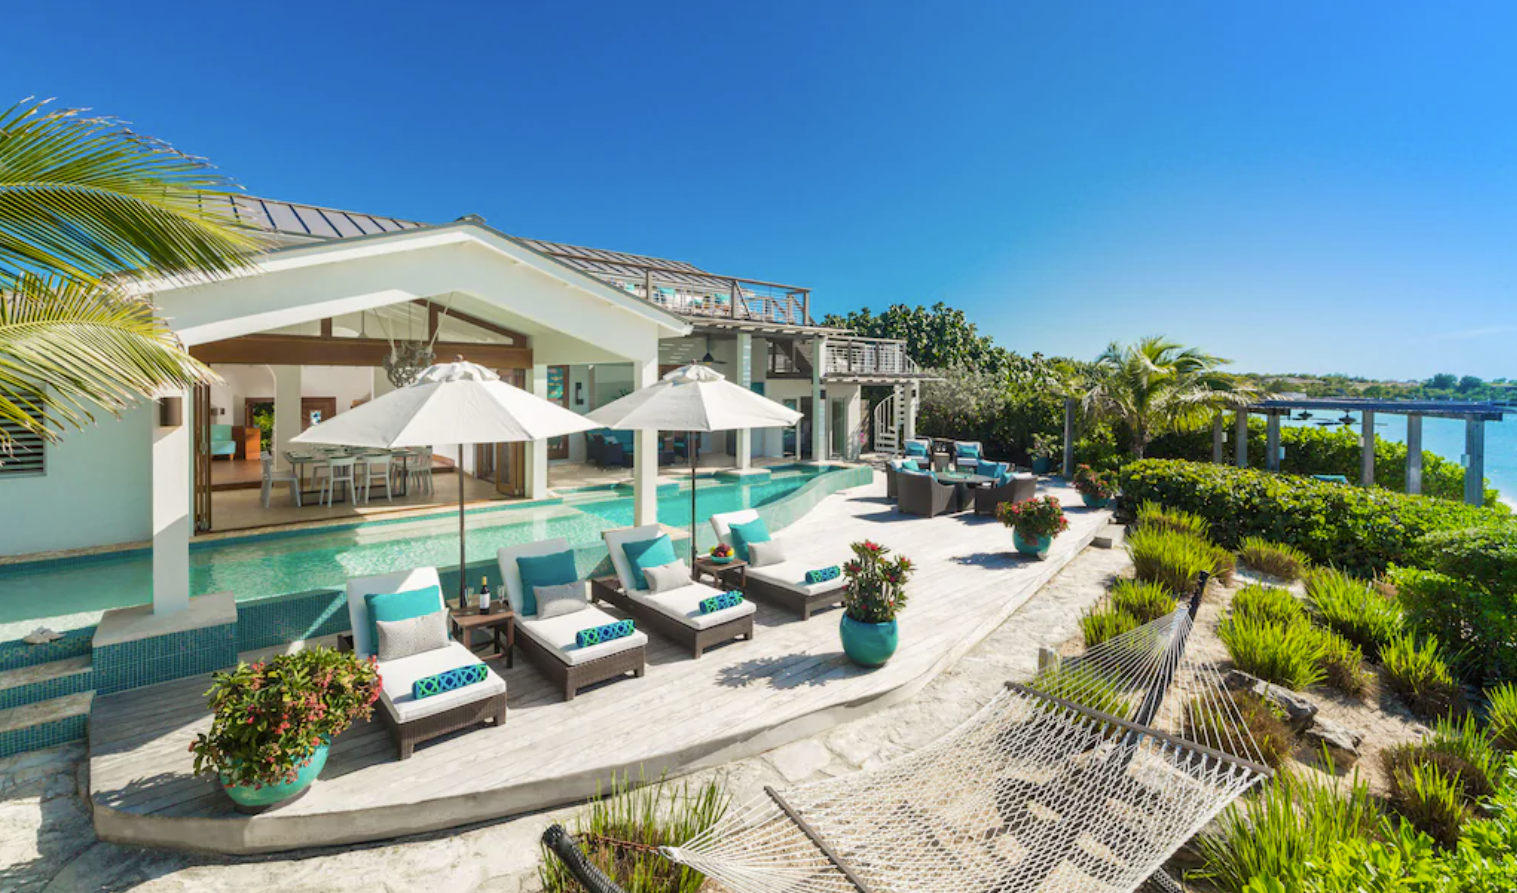 An aerial view of a luxury Turks and Caicos vacation rental with a private pool. Shaded lounge chairs overlook the ocean from a private patio with a gorgeous pool, and a two-story home with floor-to-ceiling glass panel windows.